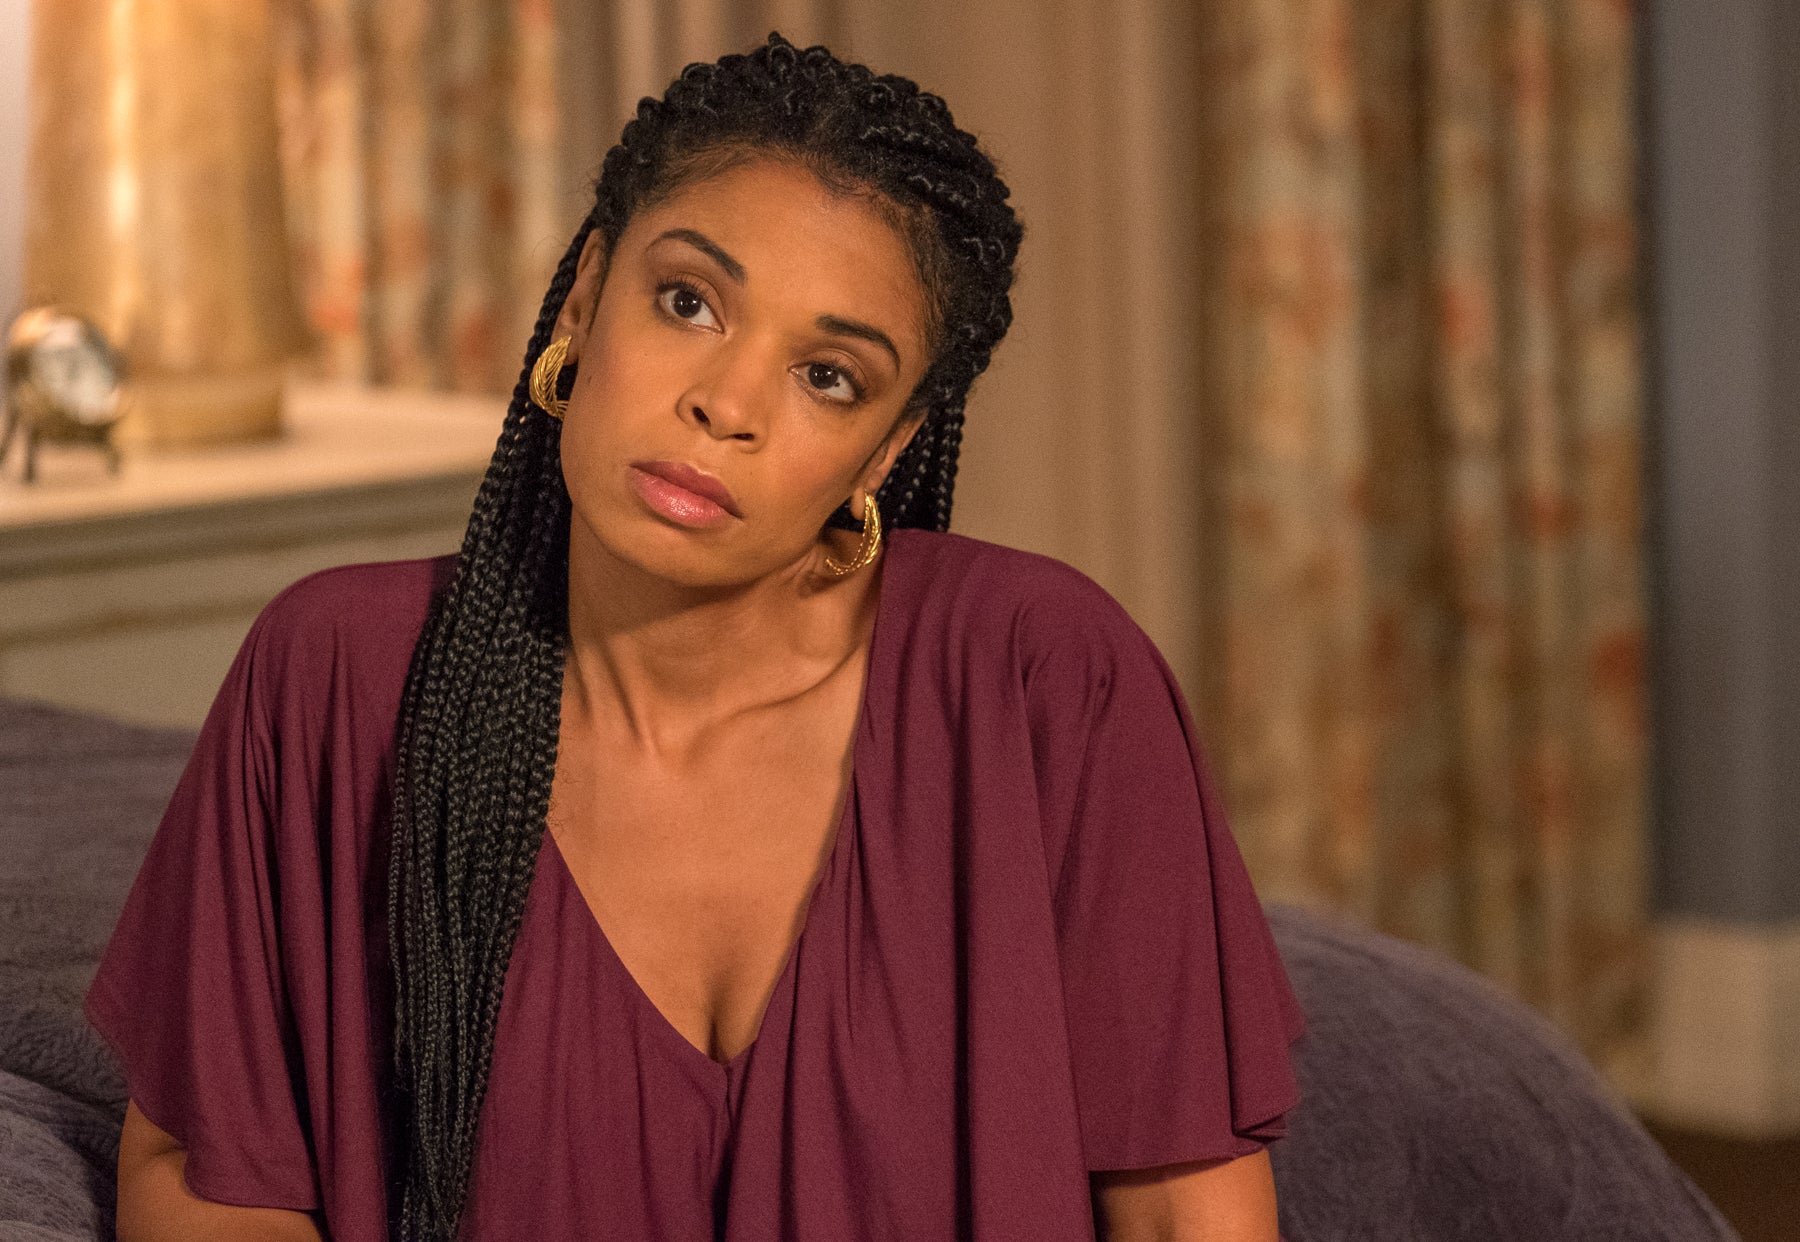 Beth Pearson (Susan Kelechi Watson) looks off camera with a serious expression in an episode of This Is Us.